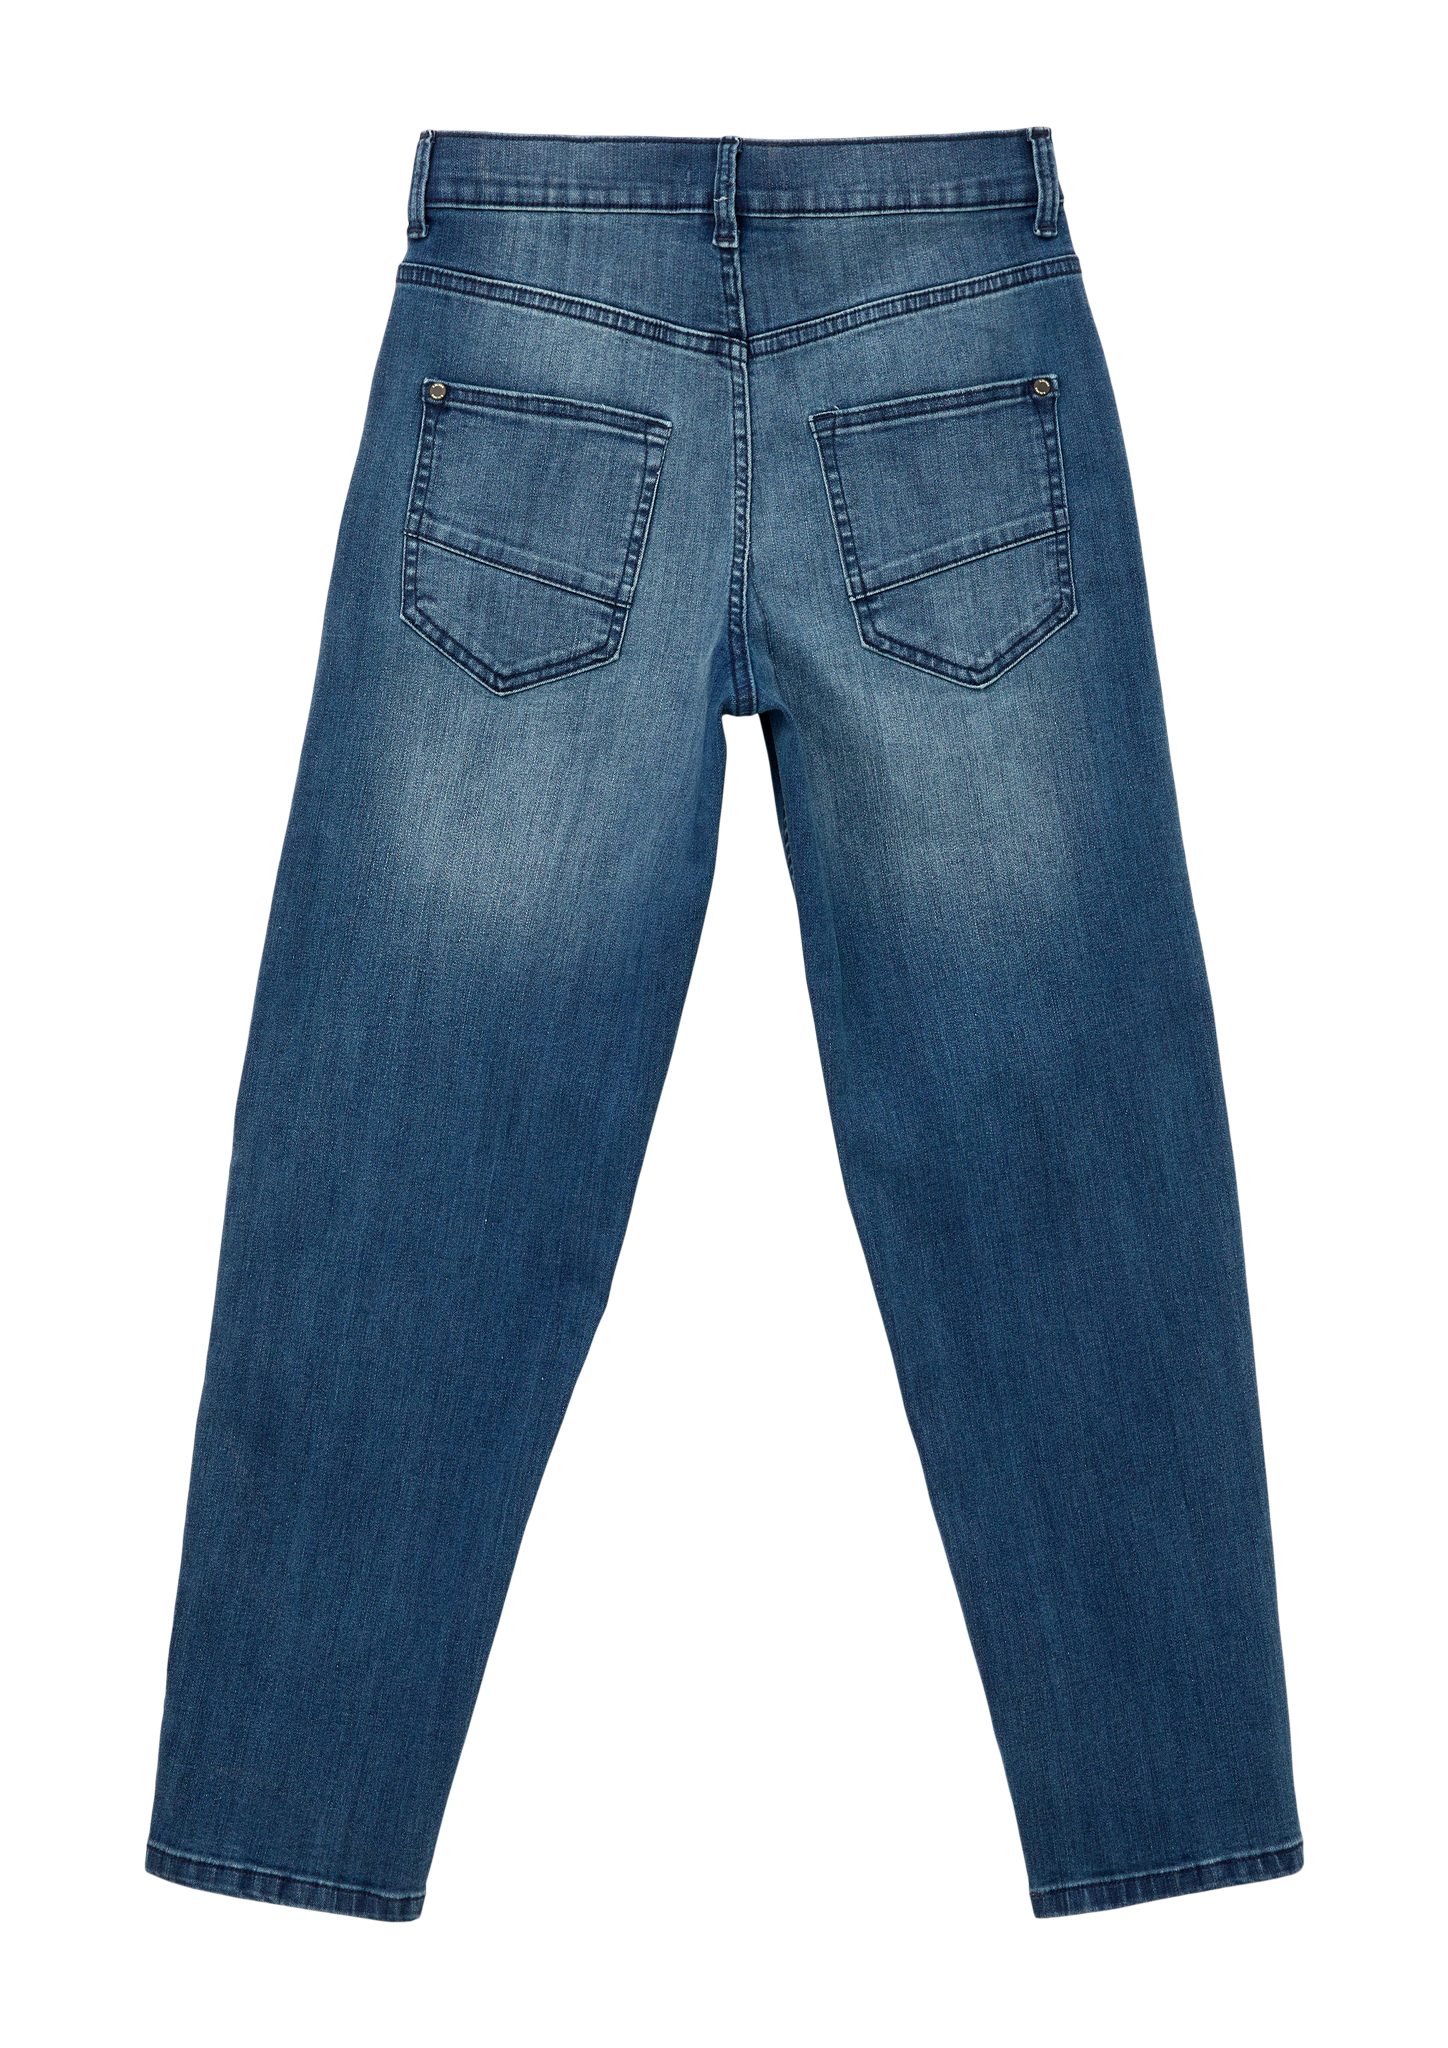 Relaxed / s.Oliver Leg Tapered / Rise Fit Mid 5-Pocket-Jeans / Dad Waschung Jeans